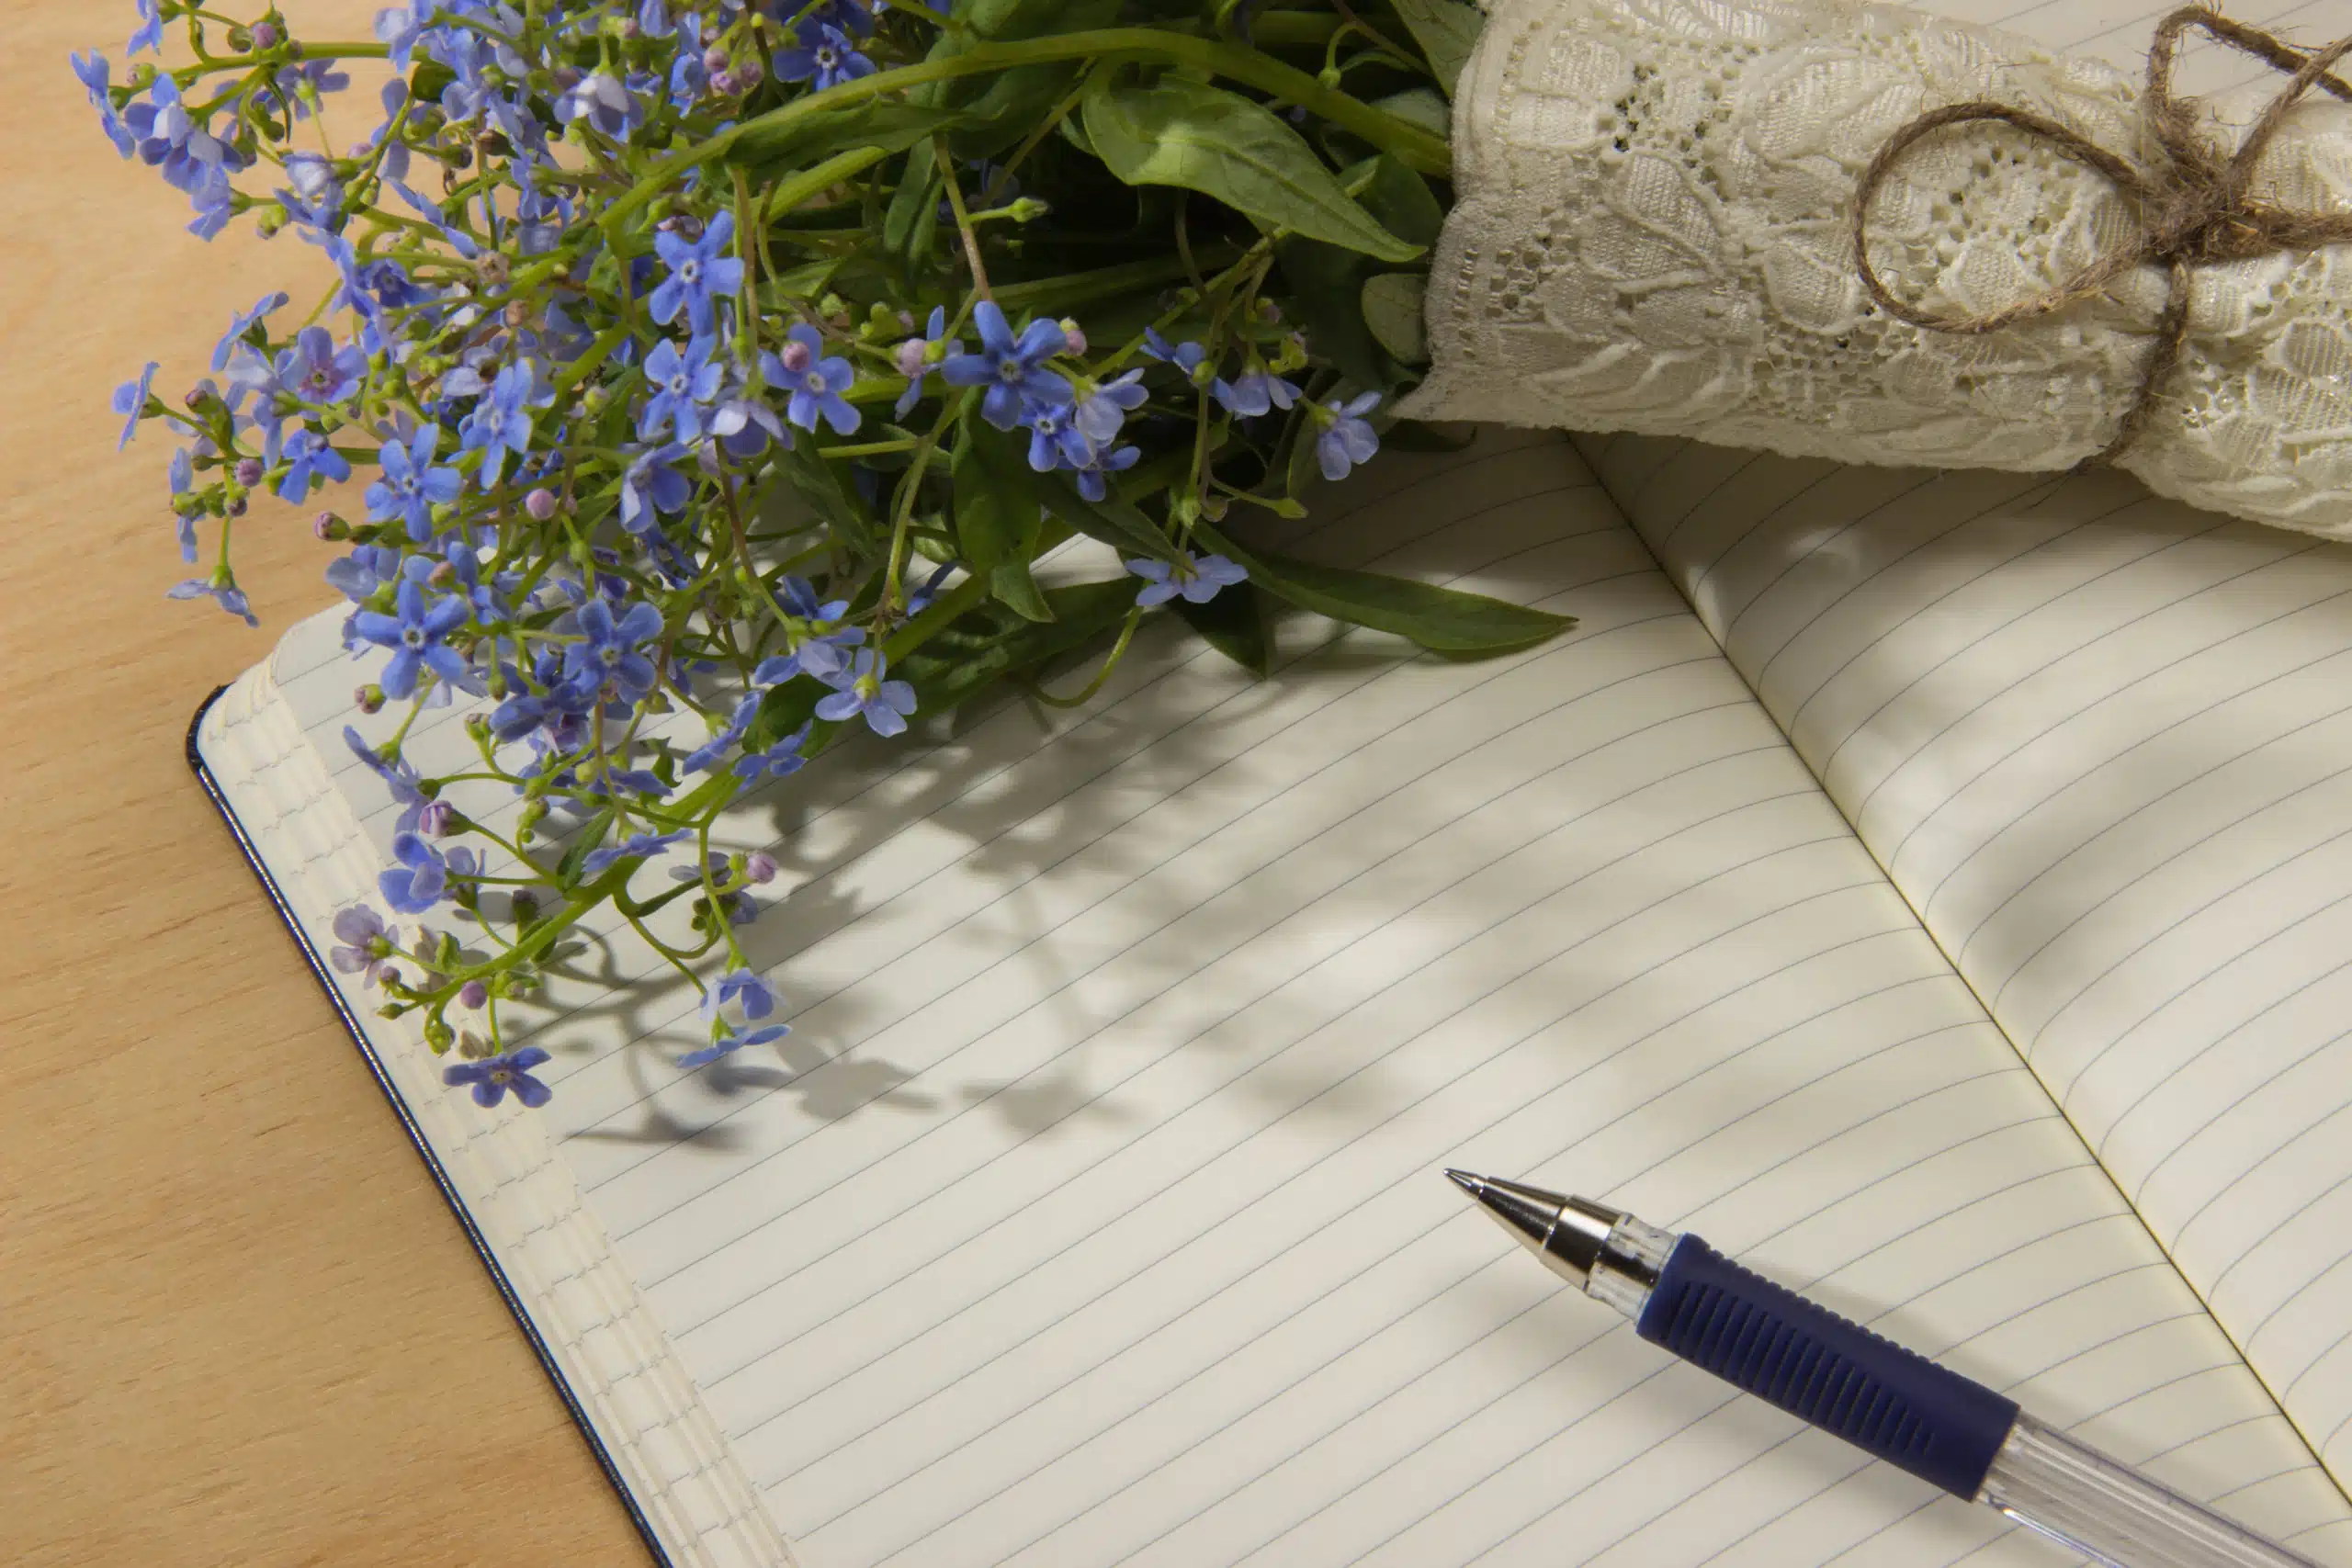 A bouquet of forget-me-not flowers, notebook and pen on the wooden table.